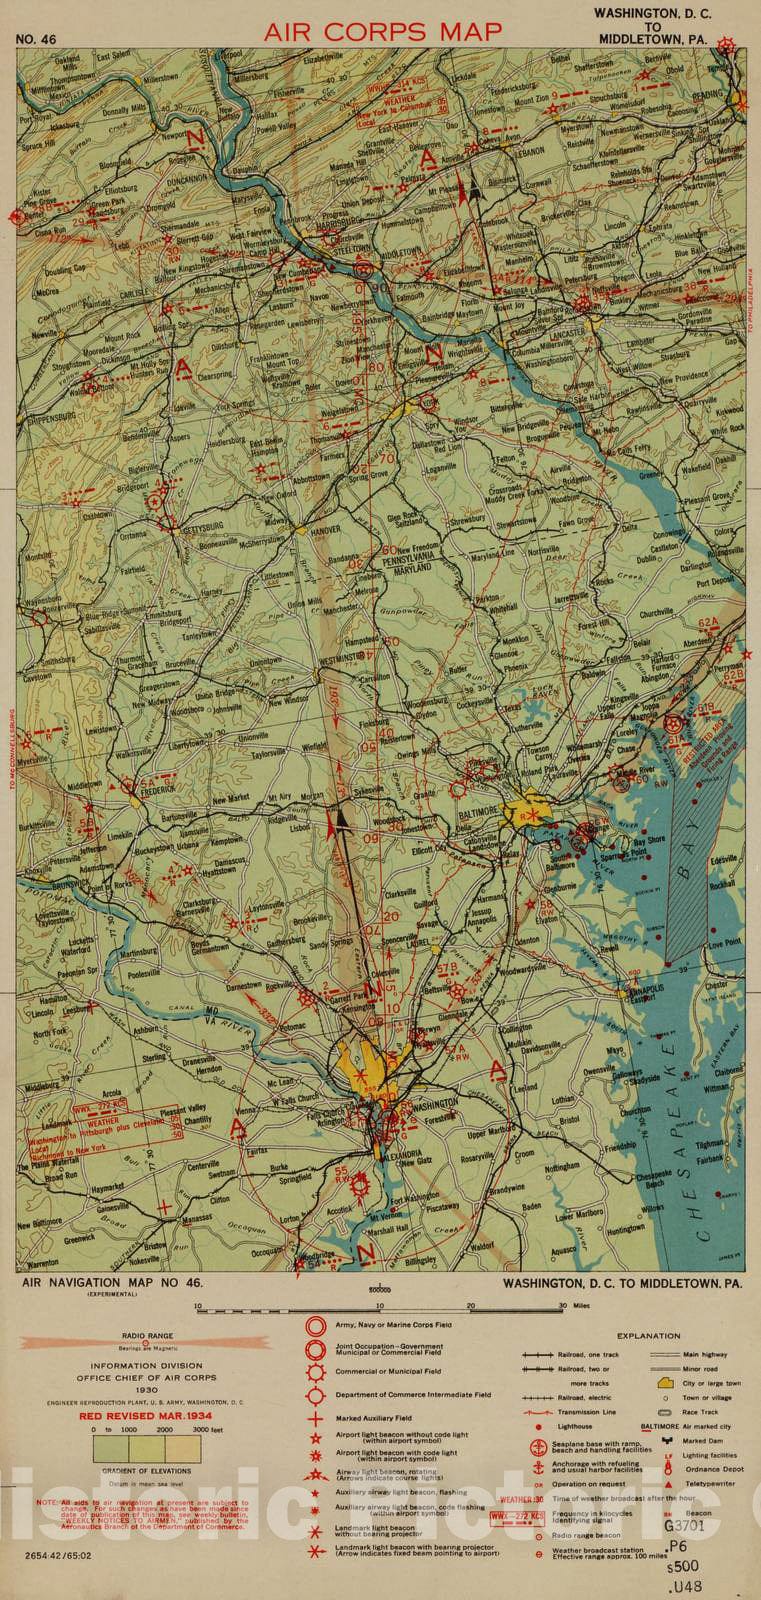 Historic 1924 Map - Aeronautical Strip maps of The United States. - No. 46, 1930 - rev. Mar. 1934 - Air Corps map